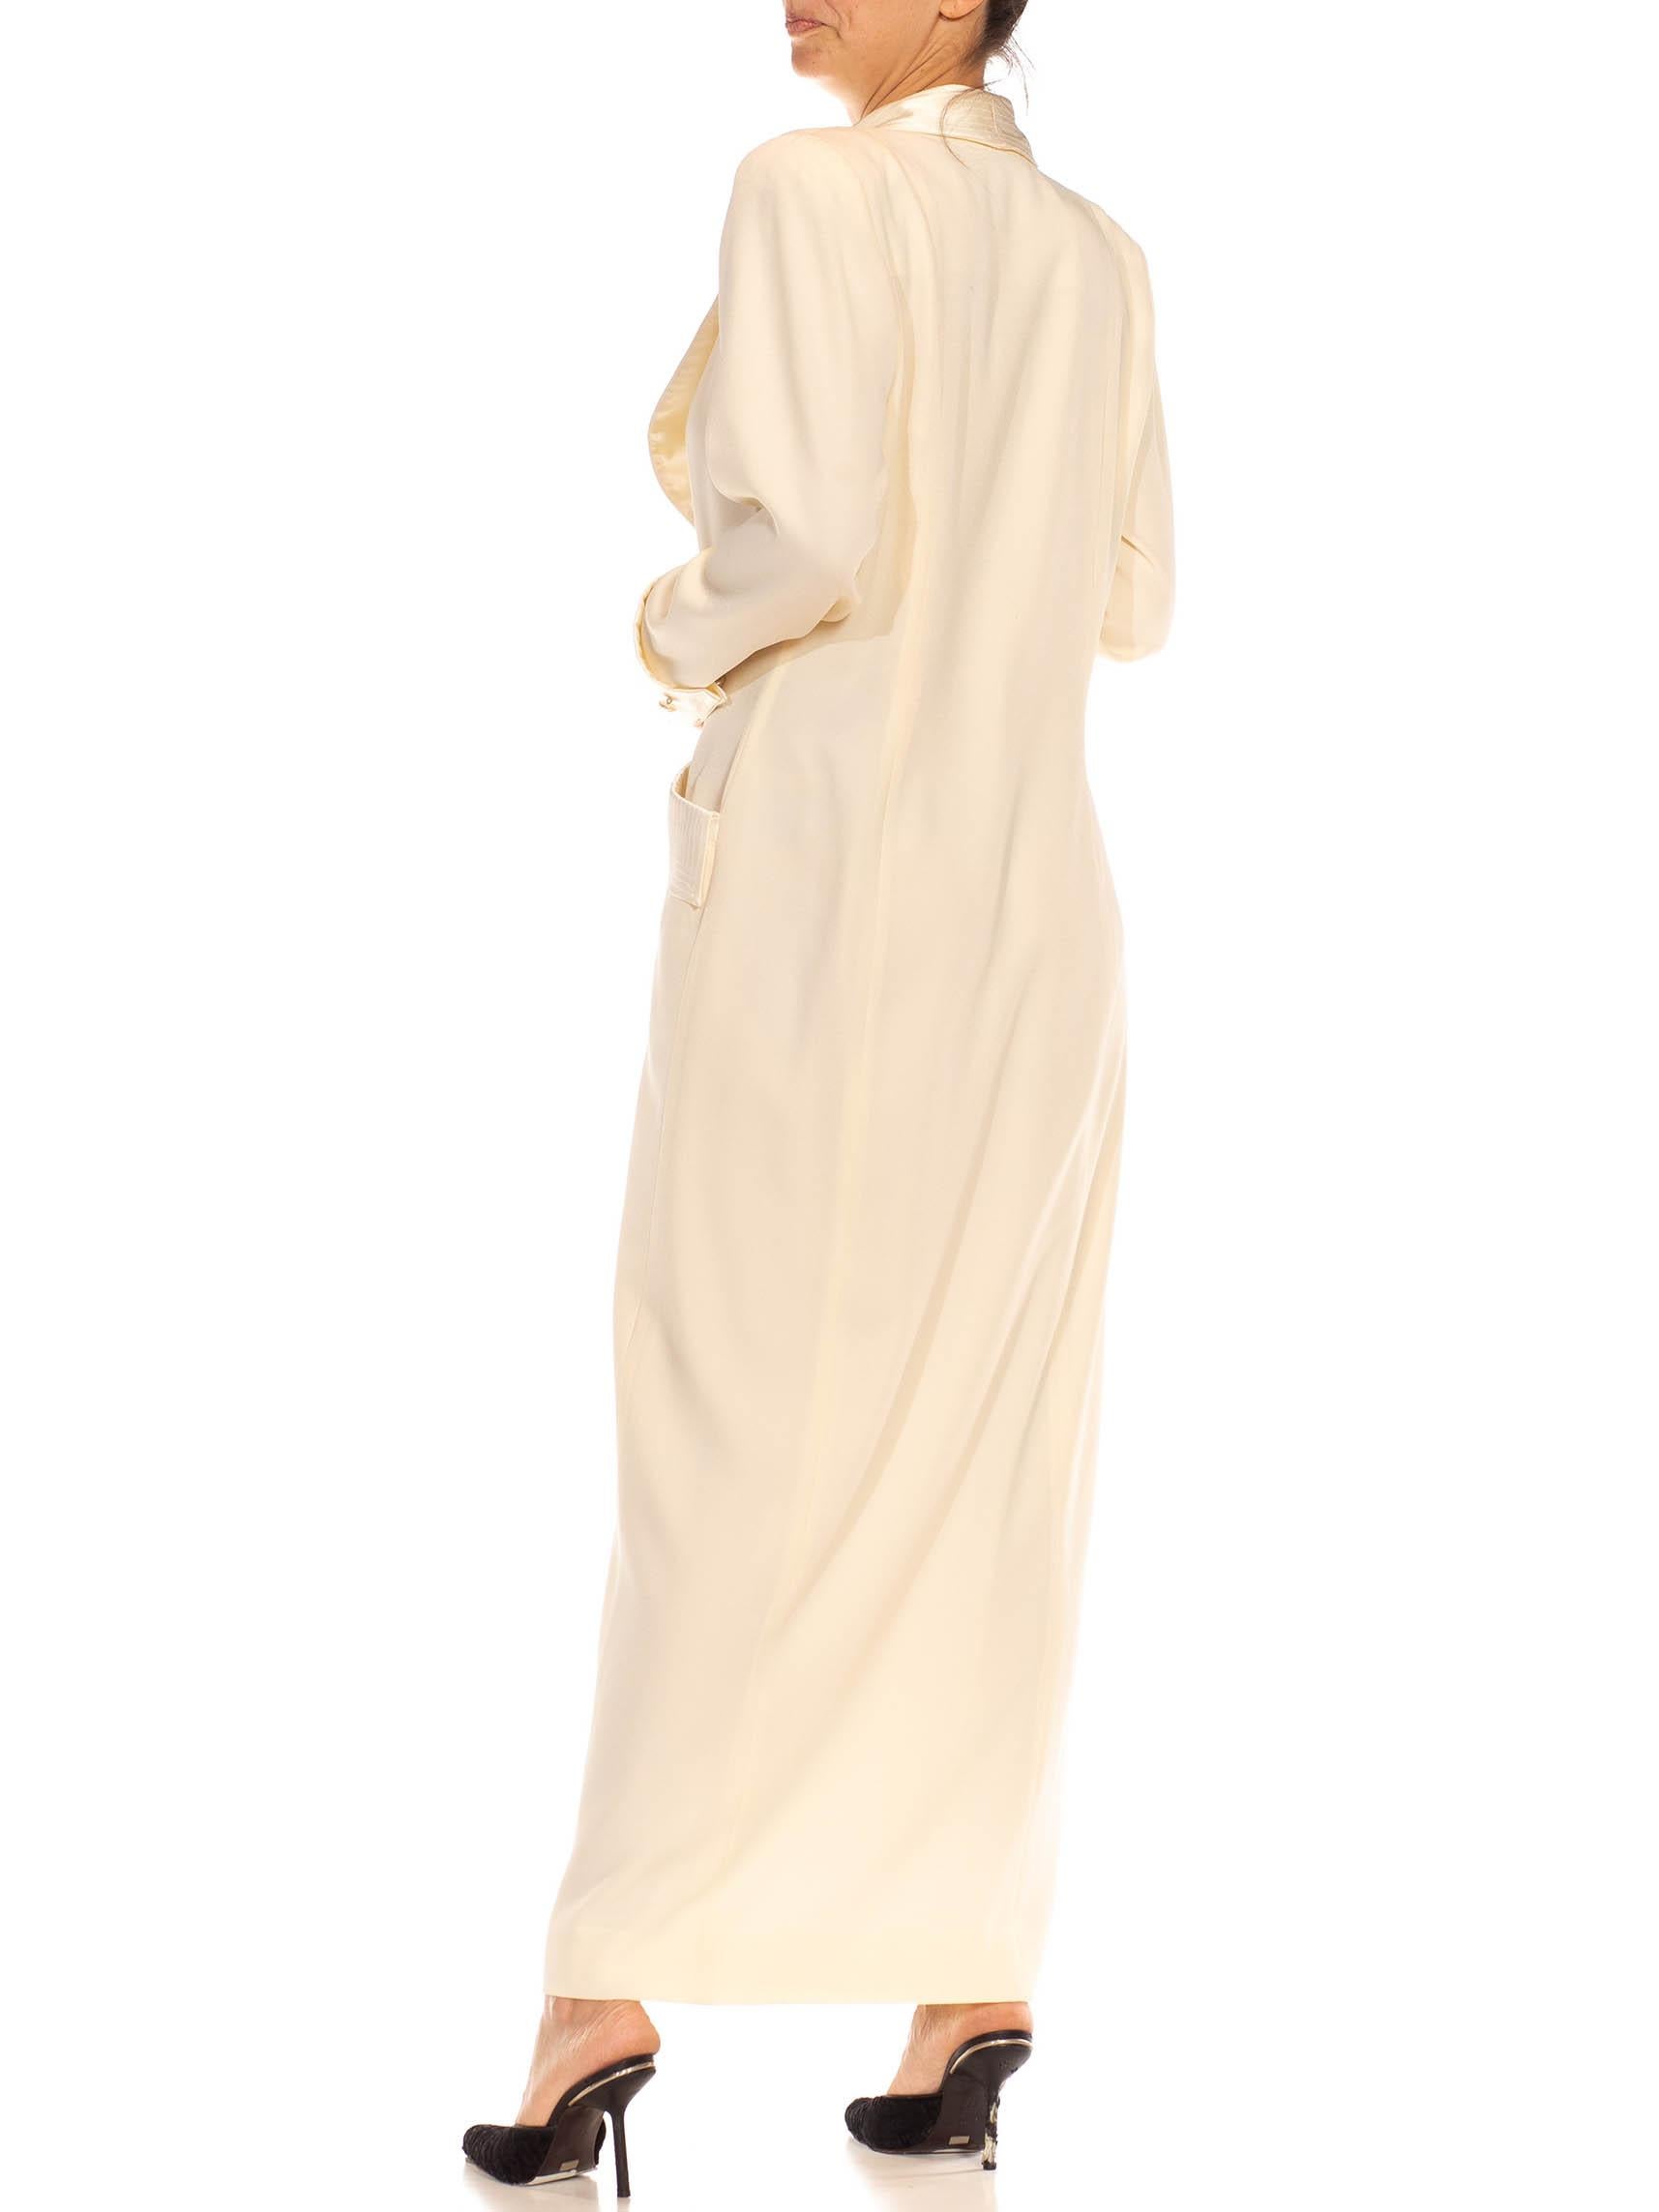 1980S Cream Polyester Glam Dress For Sale 4